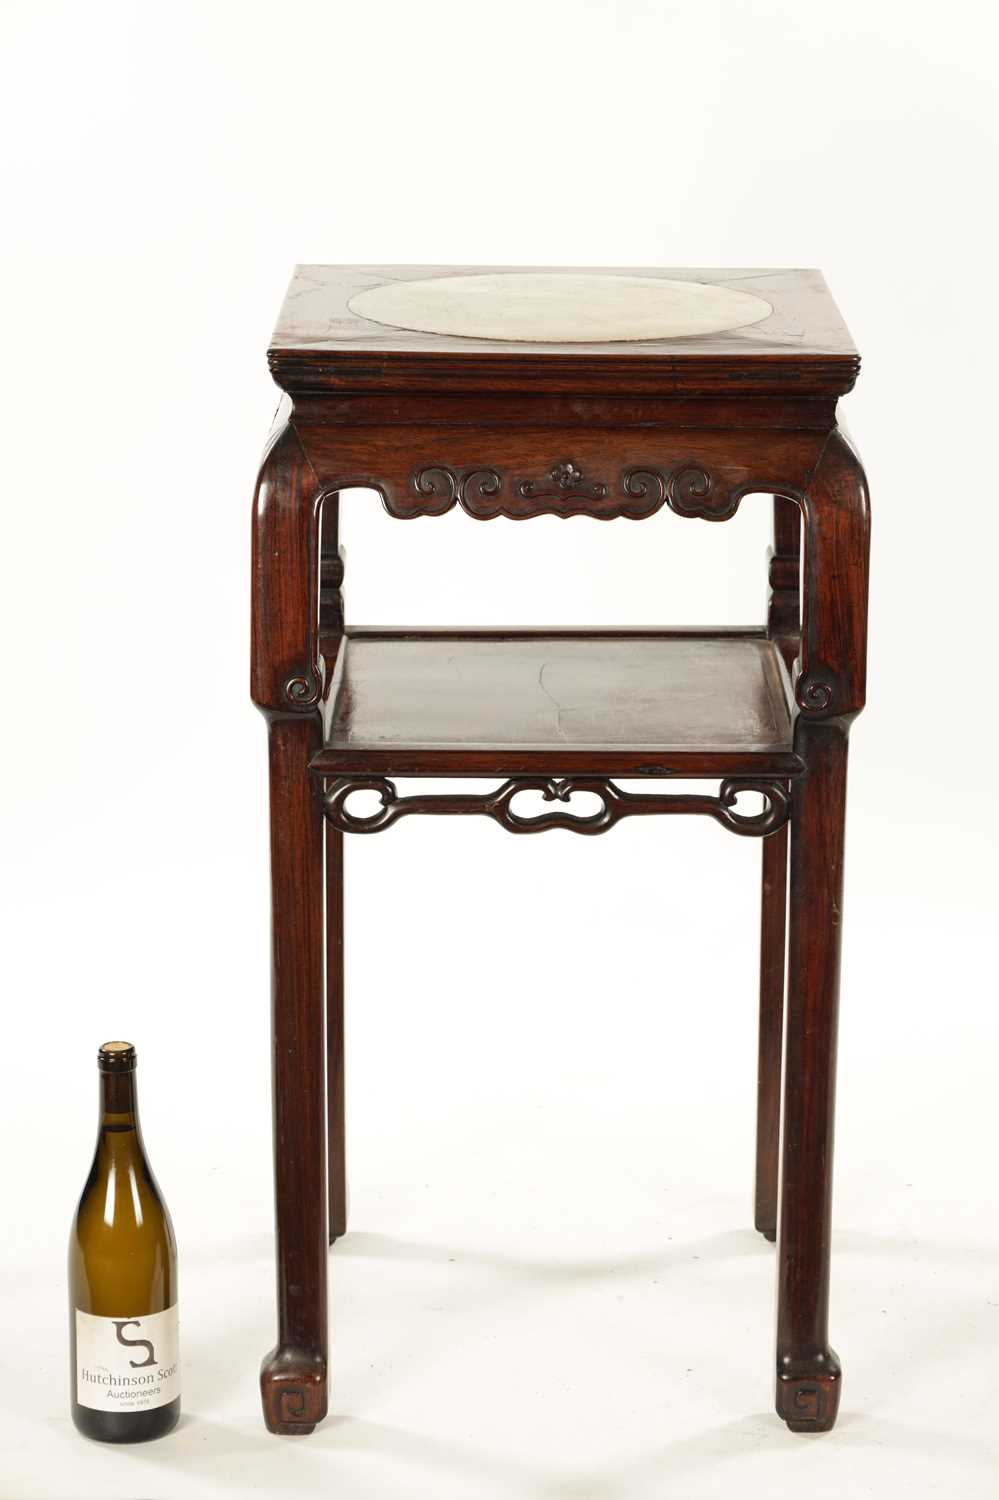 A 19TH CENTURY CHINESE HARDWOOD JARDINIERE STAND - Image 7 of 7